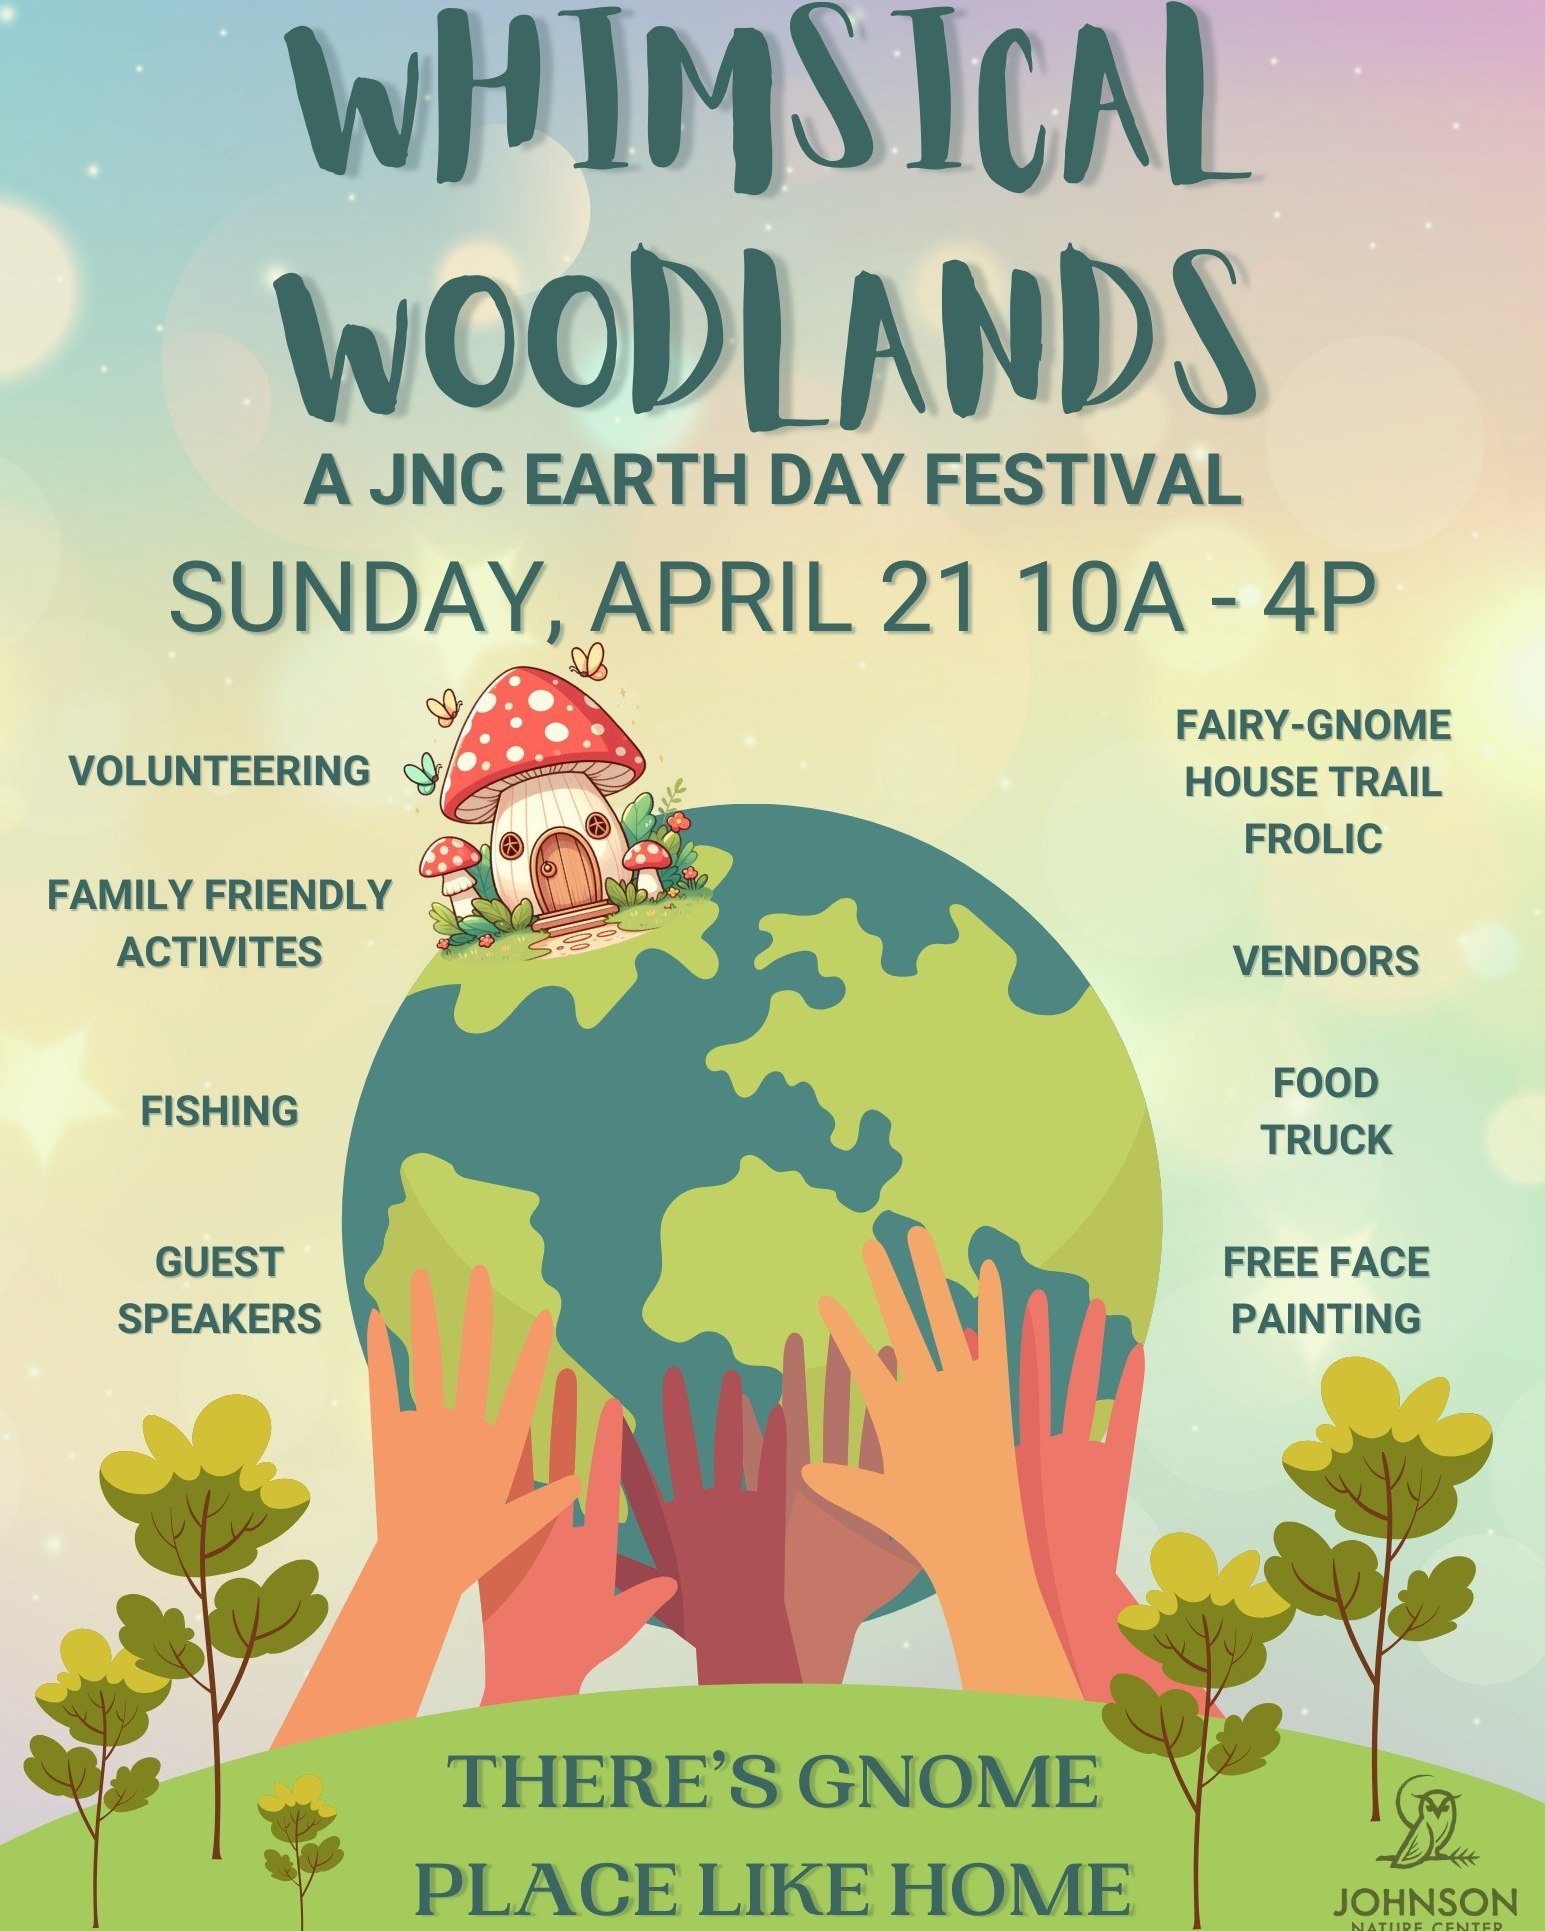 TODAY IS THE DAY!!! Come join us at the Johnson Nature Center between 10 am and 4 pm for Whimsical Woodlands! Discover unique offerings from vendors like Hedgewitch Haven, selling exquisite handmade jewelry adorned with semi-precious stones, homegrow